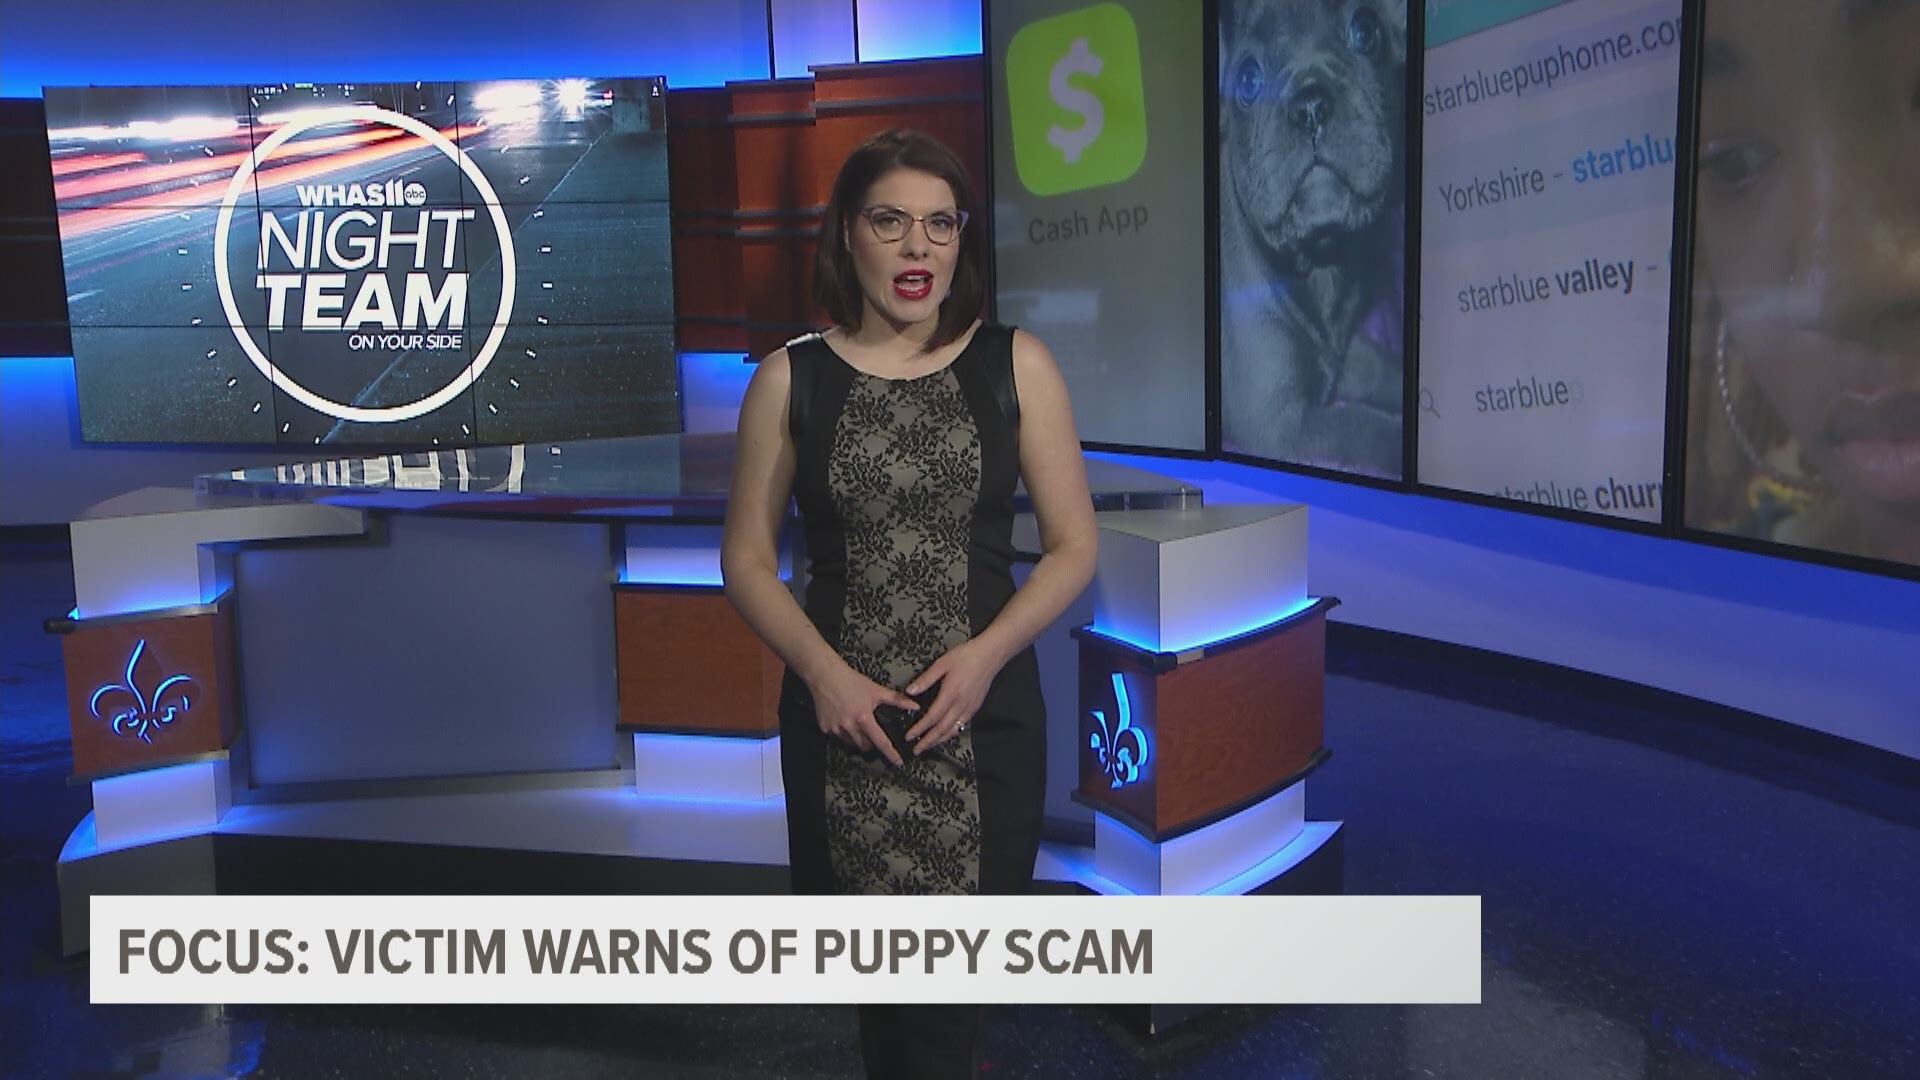 A global scam is preying on those who think they're getting a cute puppy but one local woman shares her story of how she became a victim.